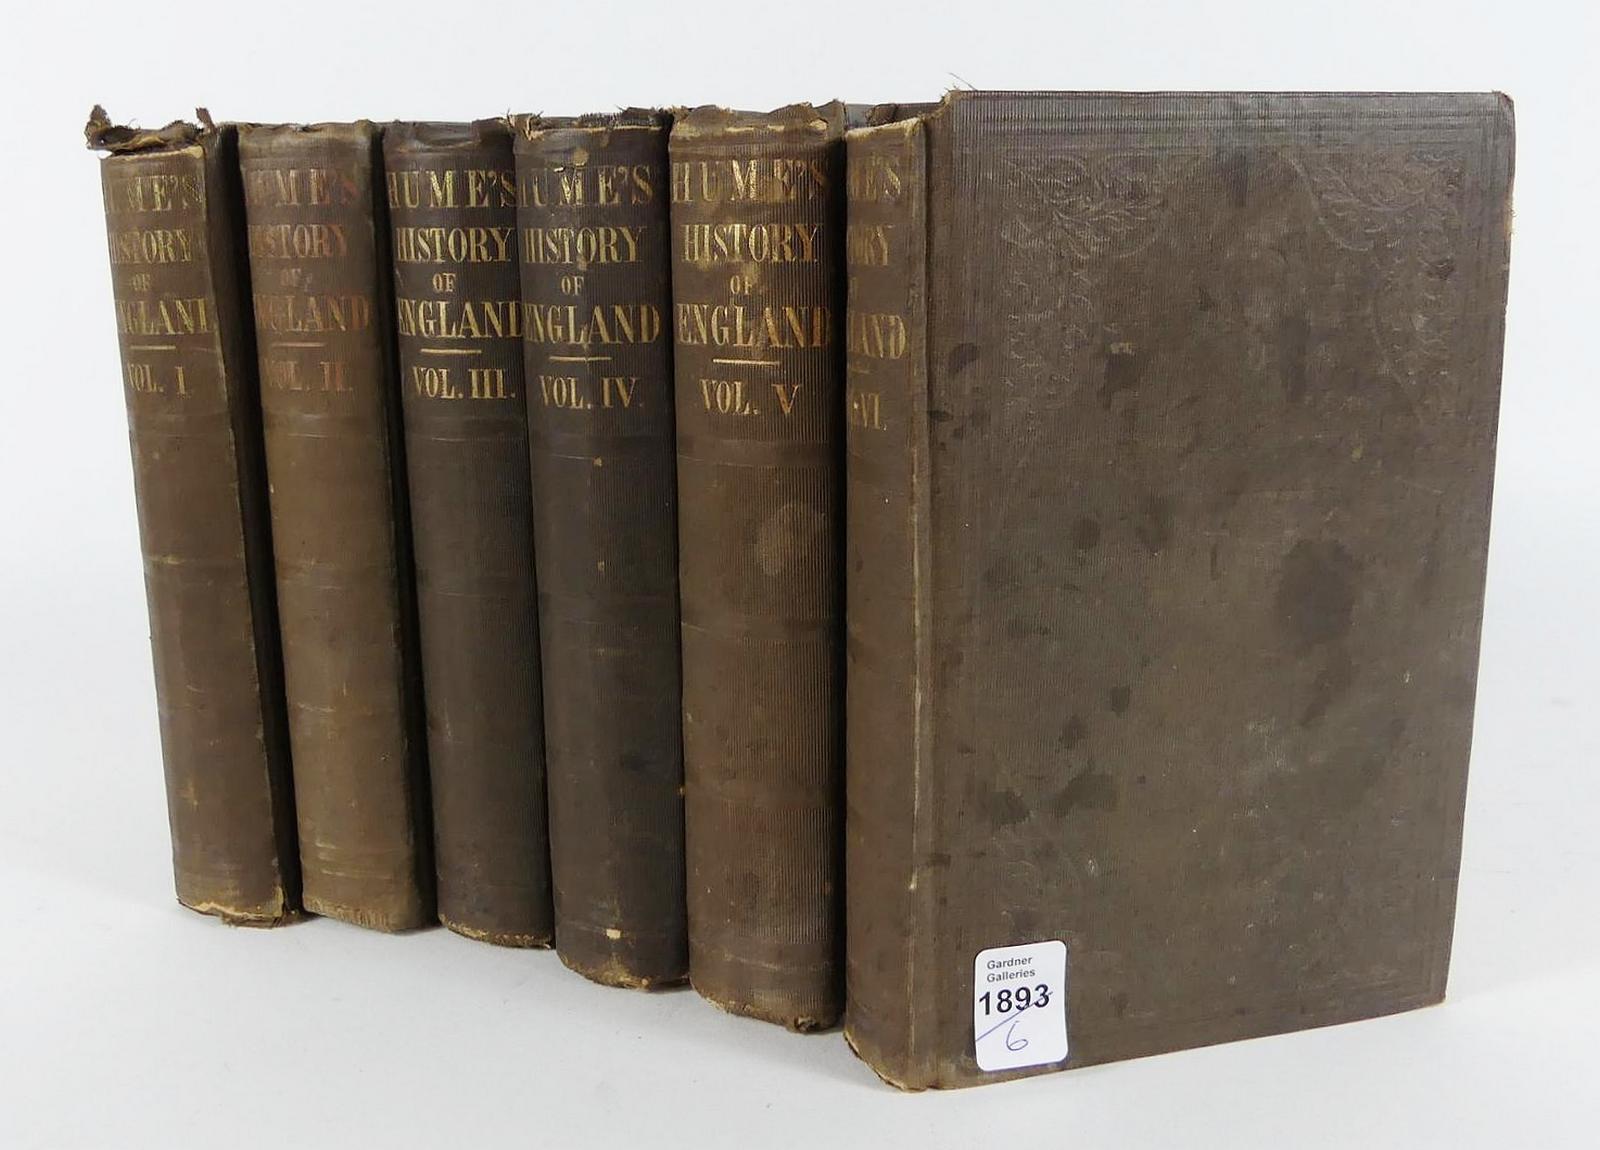 6-VOLUME "HUMES HISTORY OF ENGLAND"